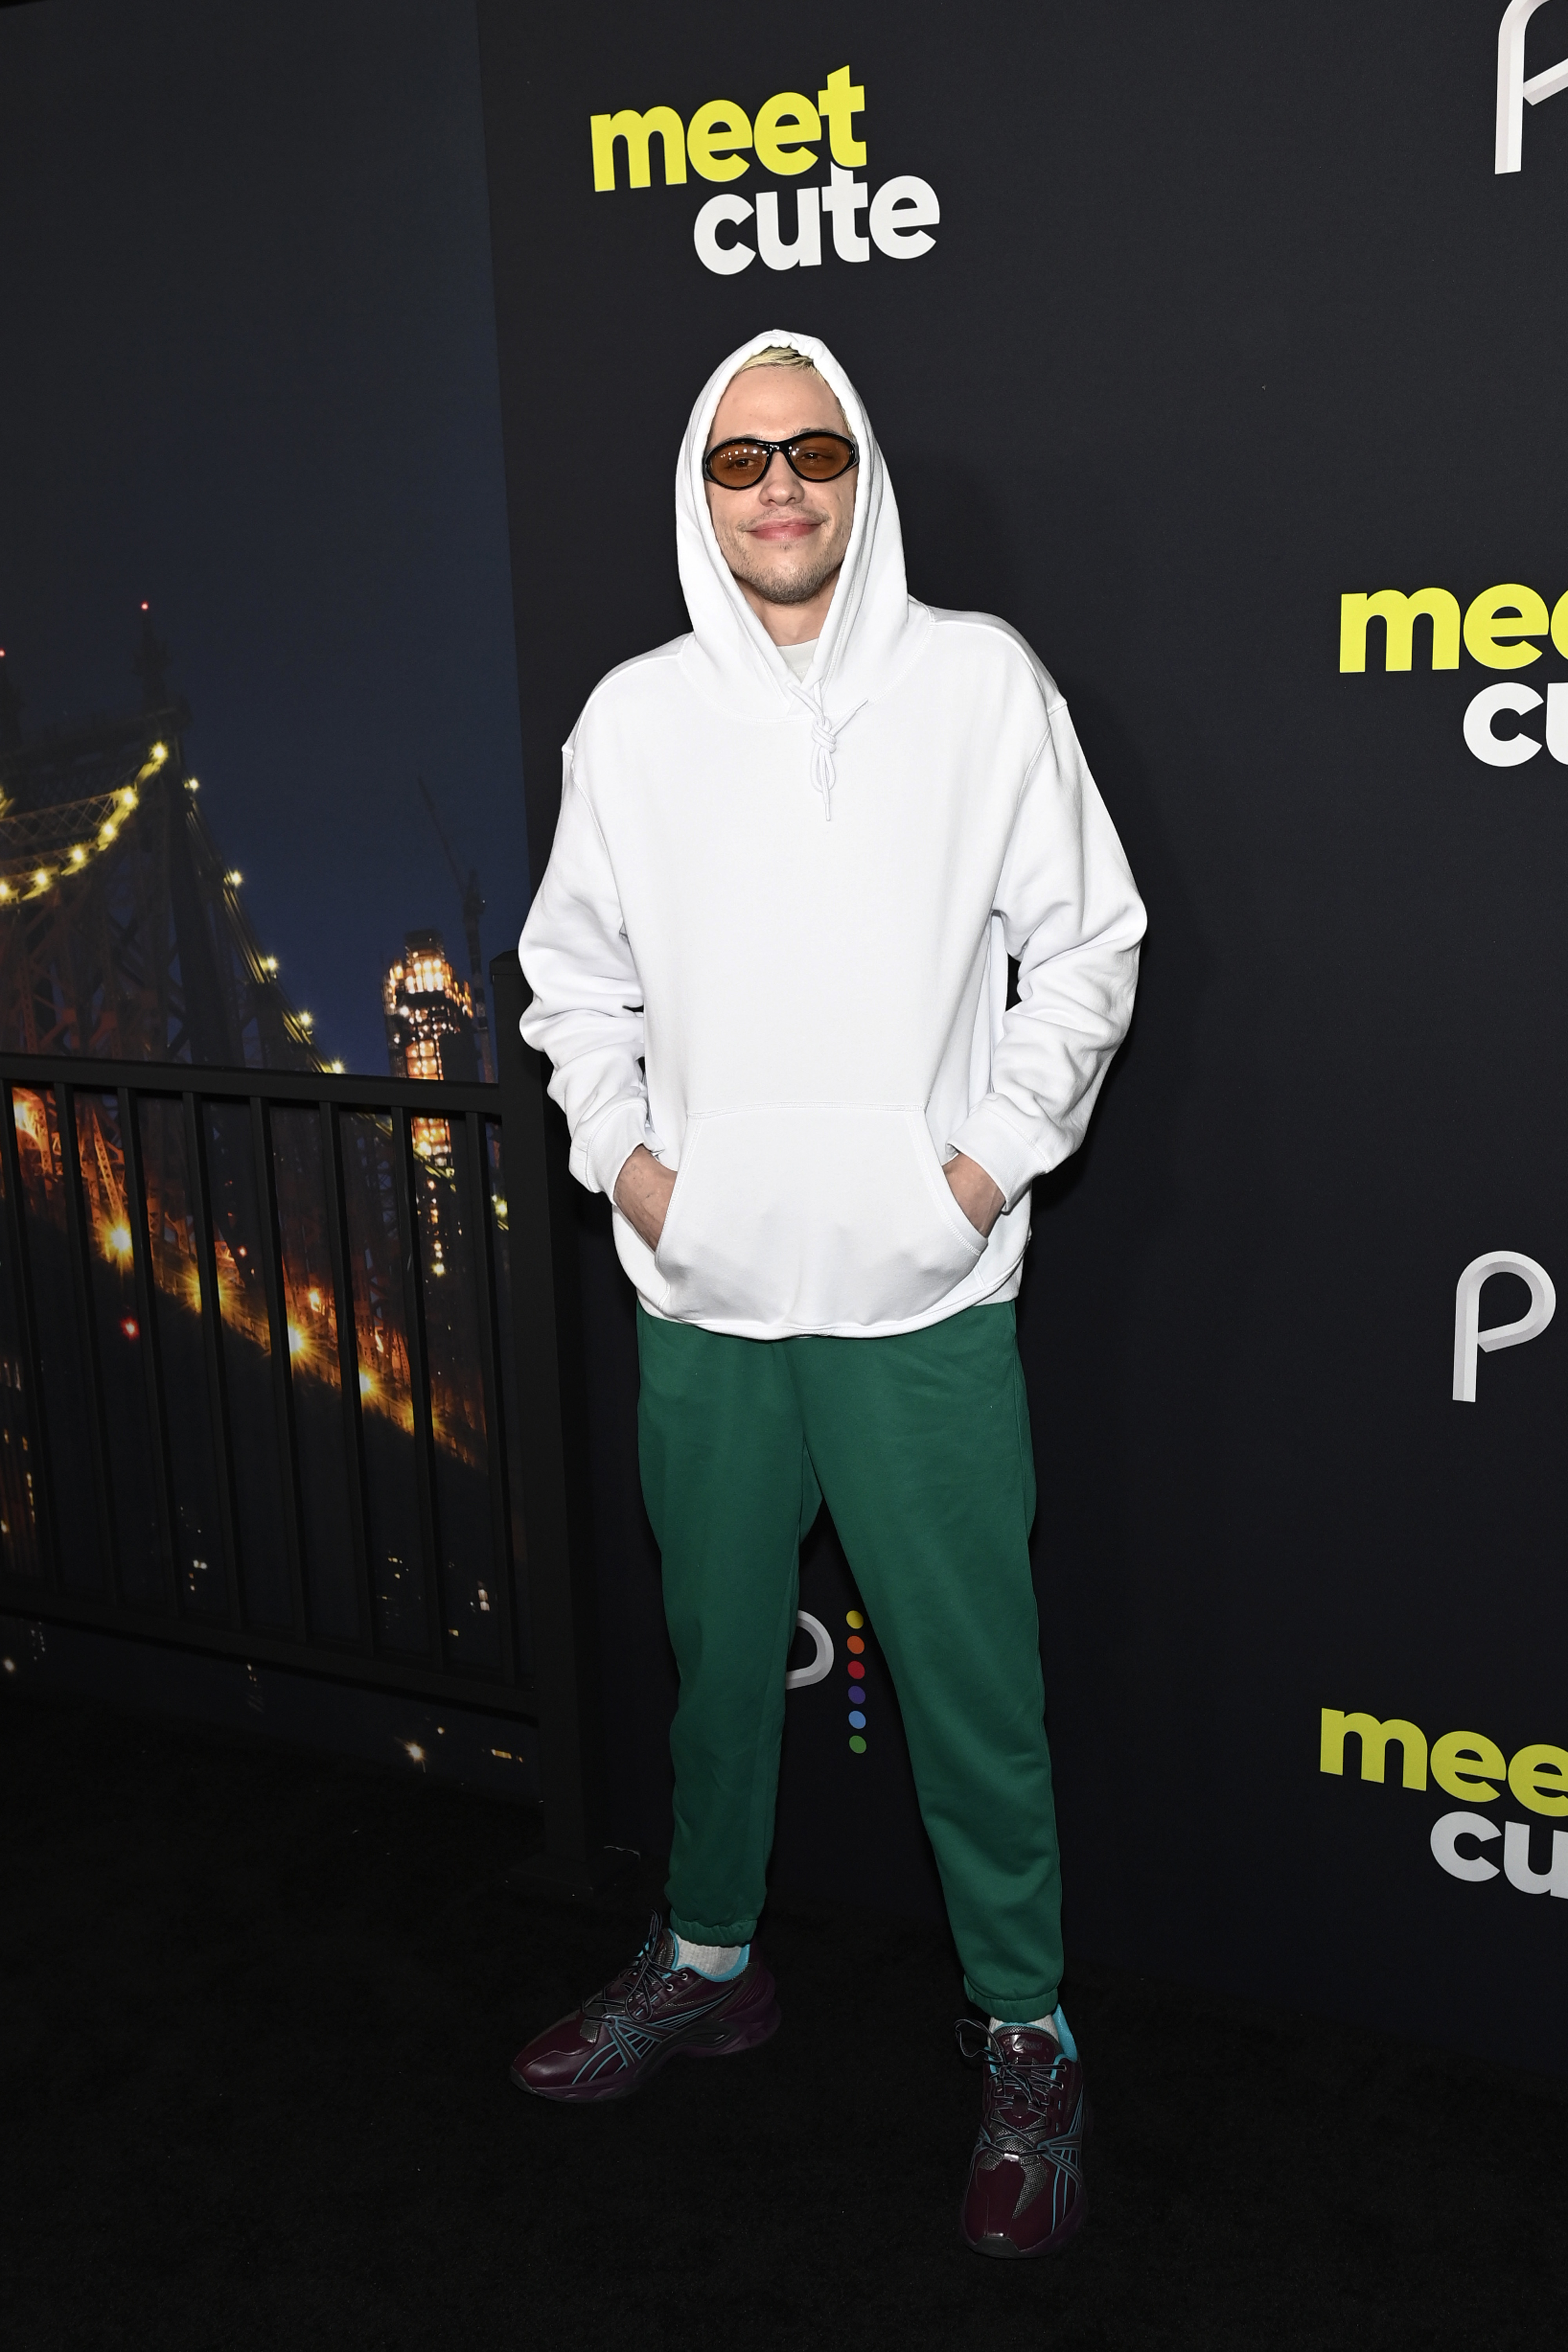 Pete in the casual outfit and wearing glasses